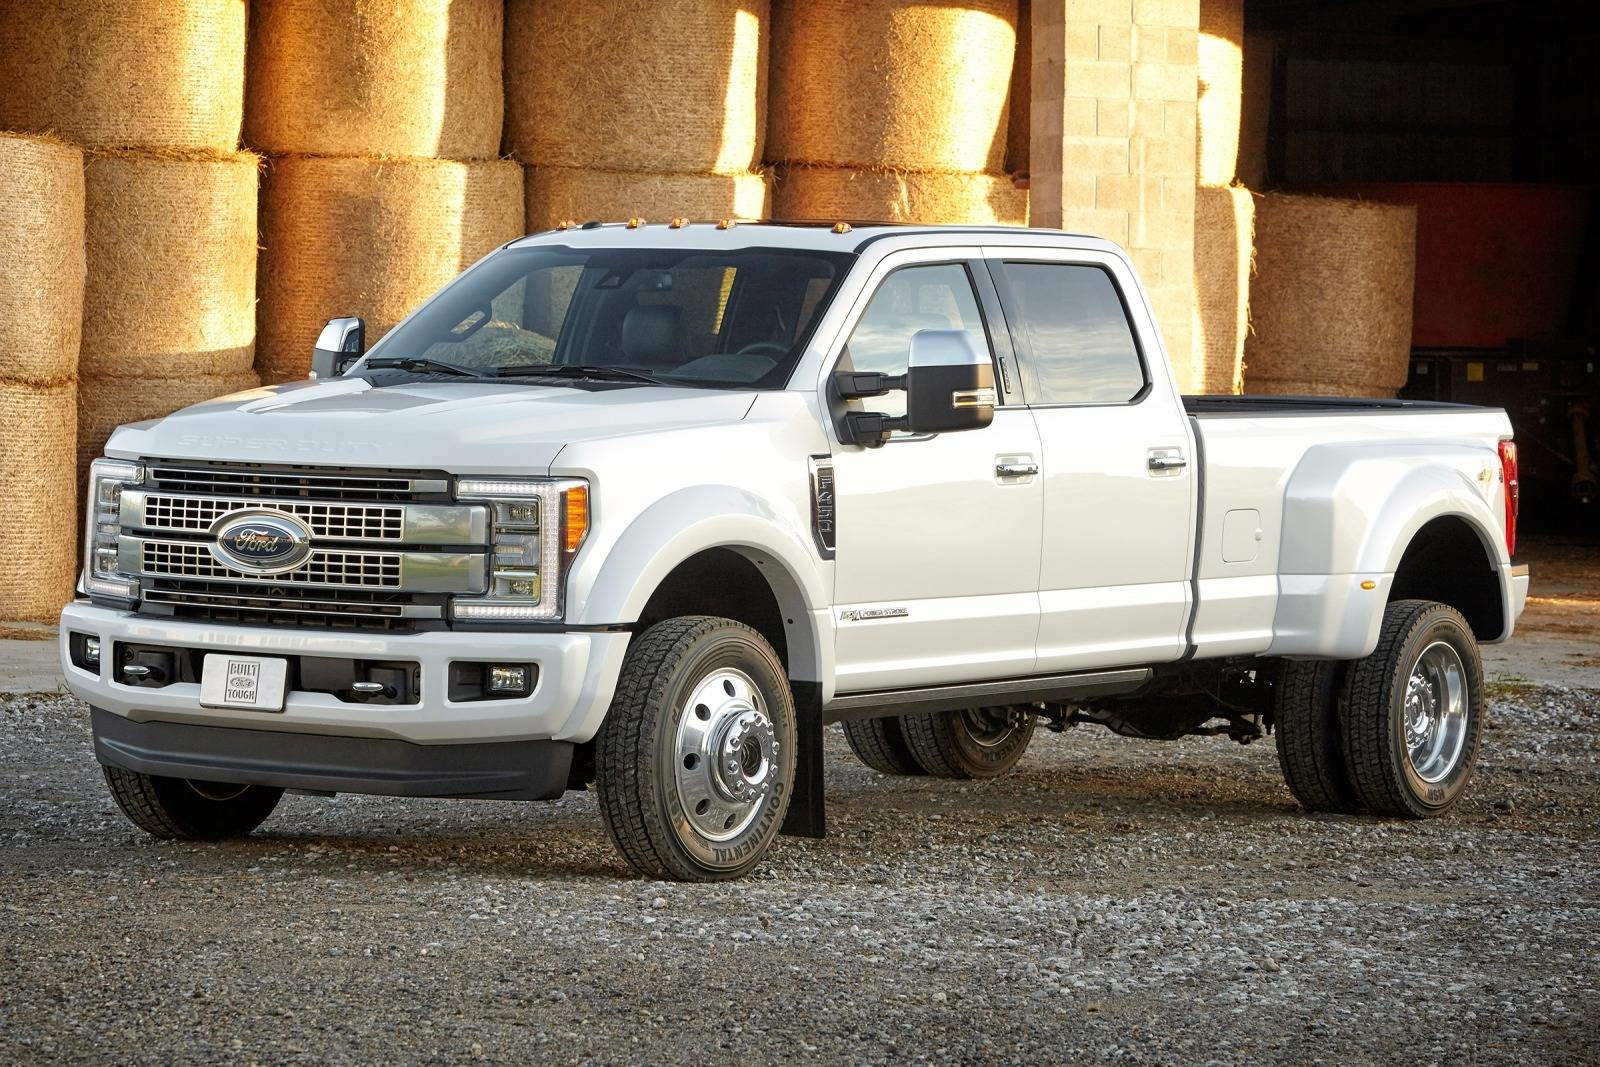 2018 Ford F 450 Super Duty Review Trims Specs Price New Interior Features Exterior Design 0607